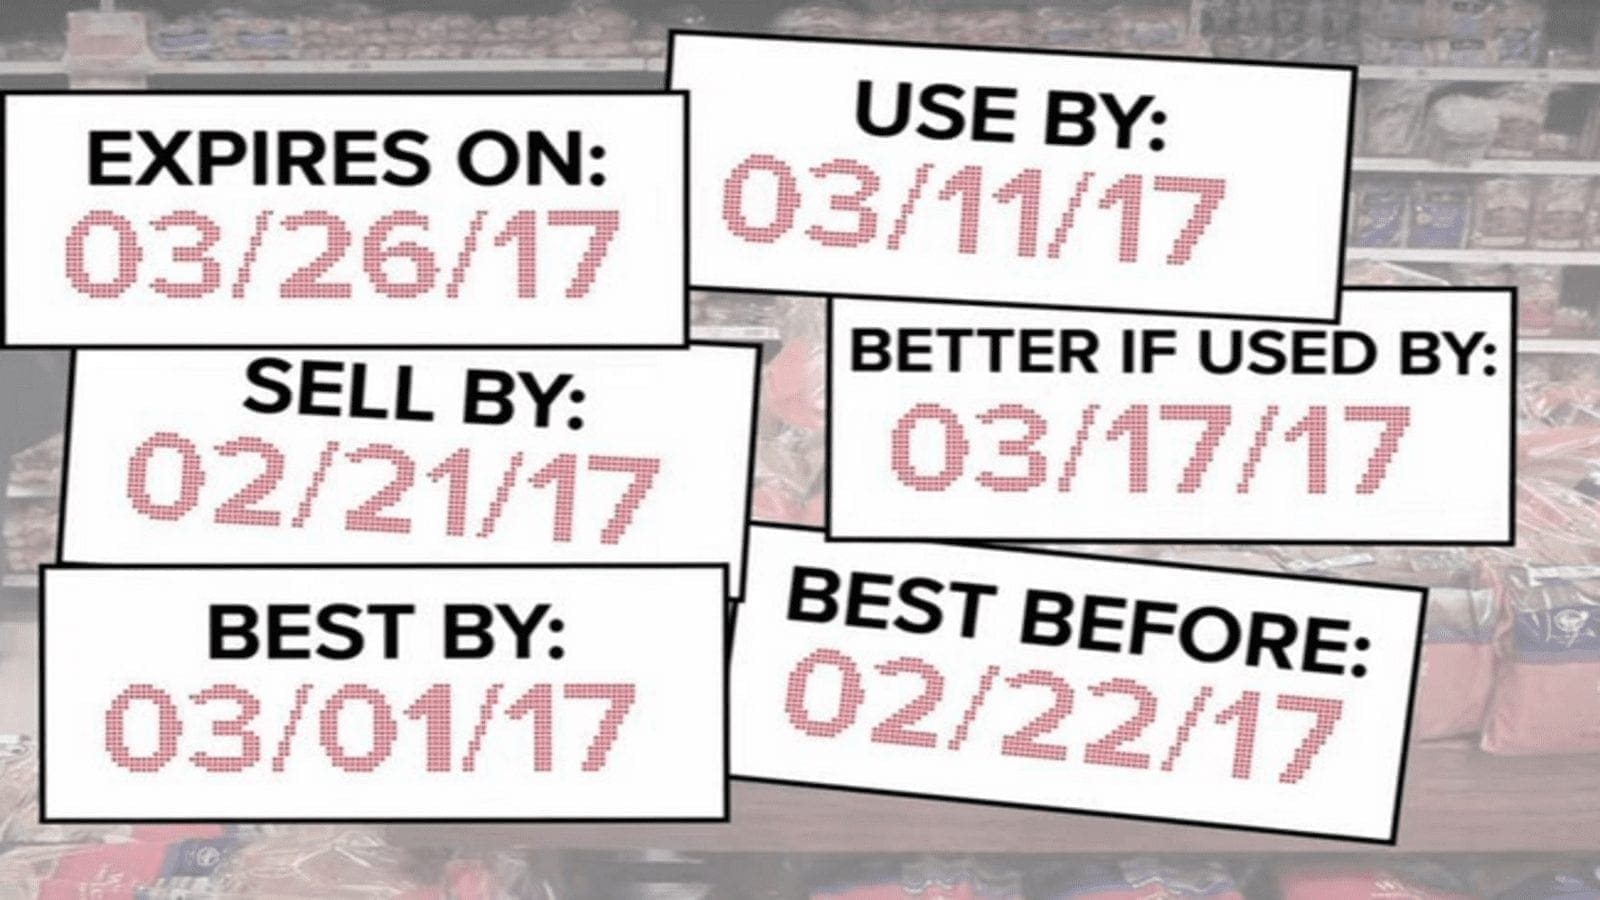 Study shows many consumers don’t know what ‘Best If Used By’ and ‘Use By’ dates mean